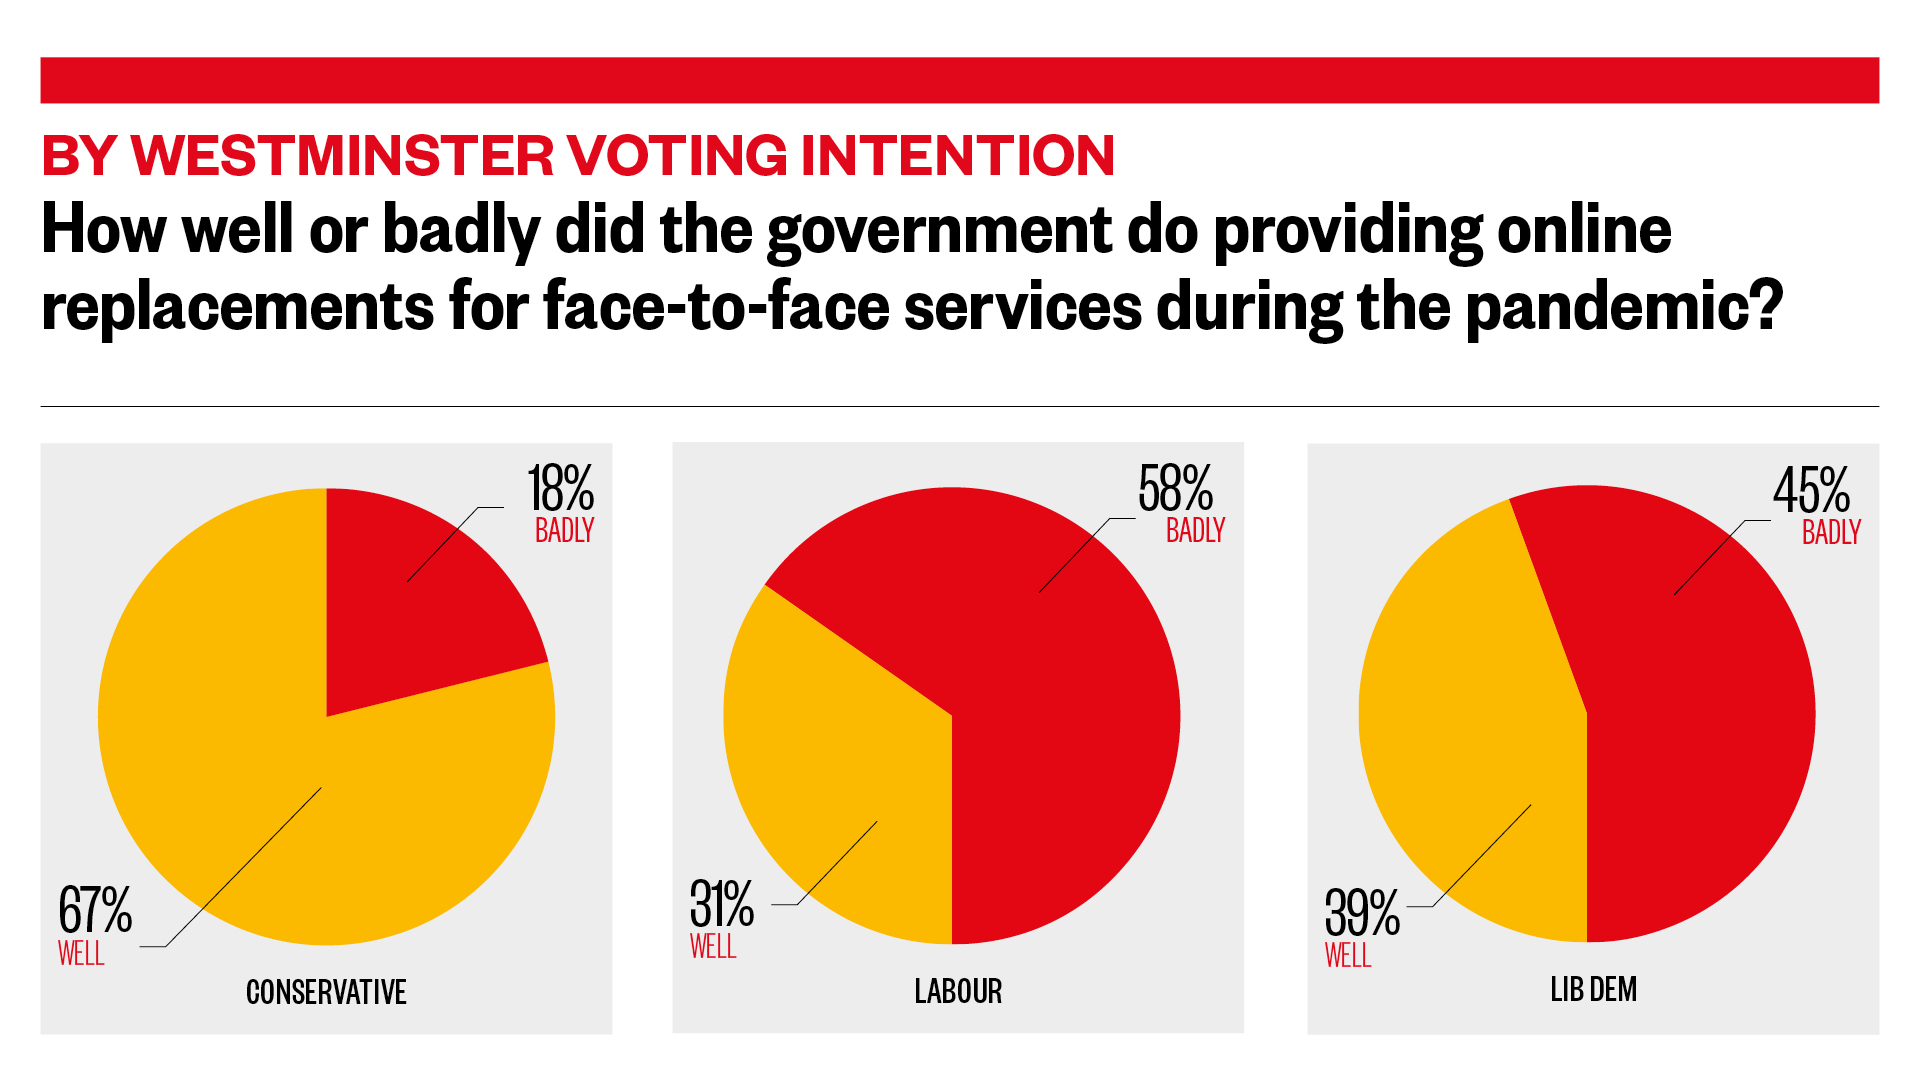 (By voting intention) How well or badly did the government do providing online replacements for face-to-face services during the pandemic?